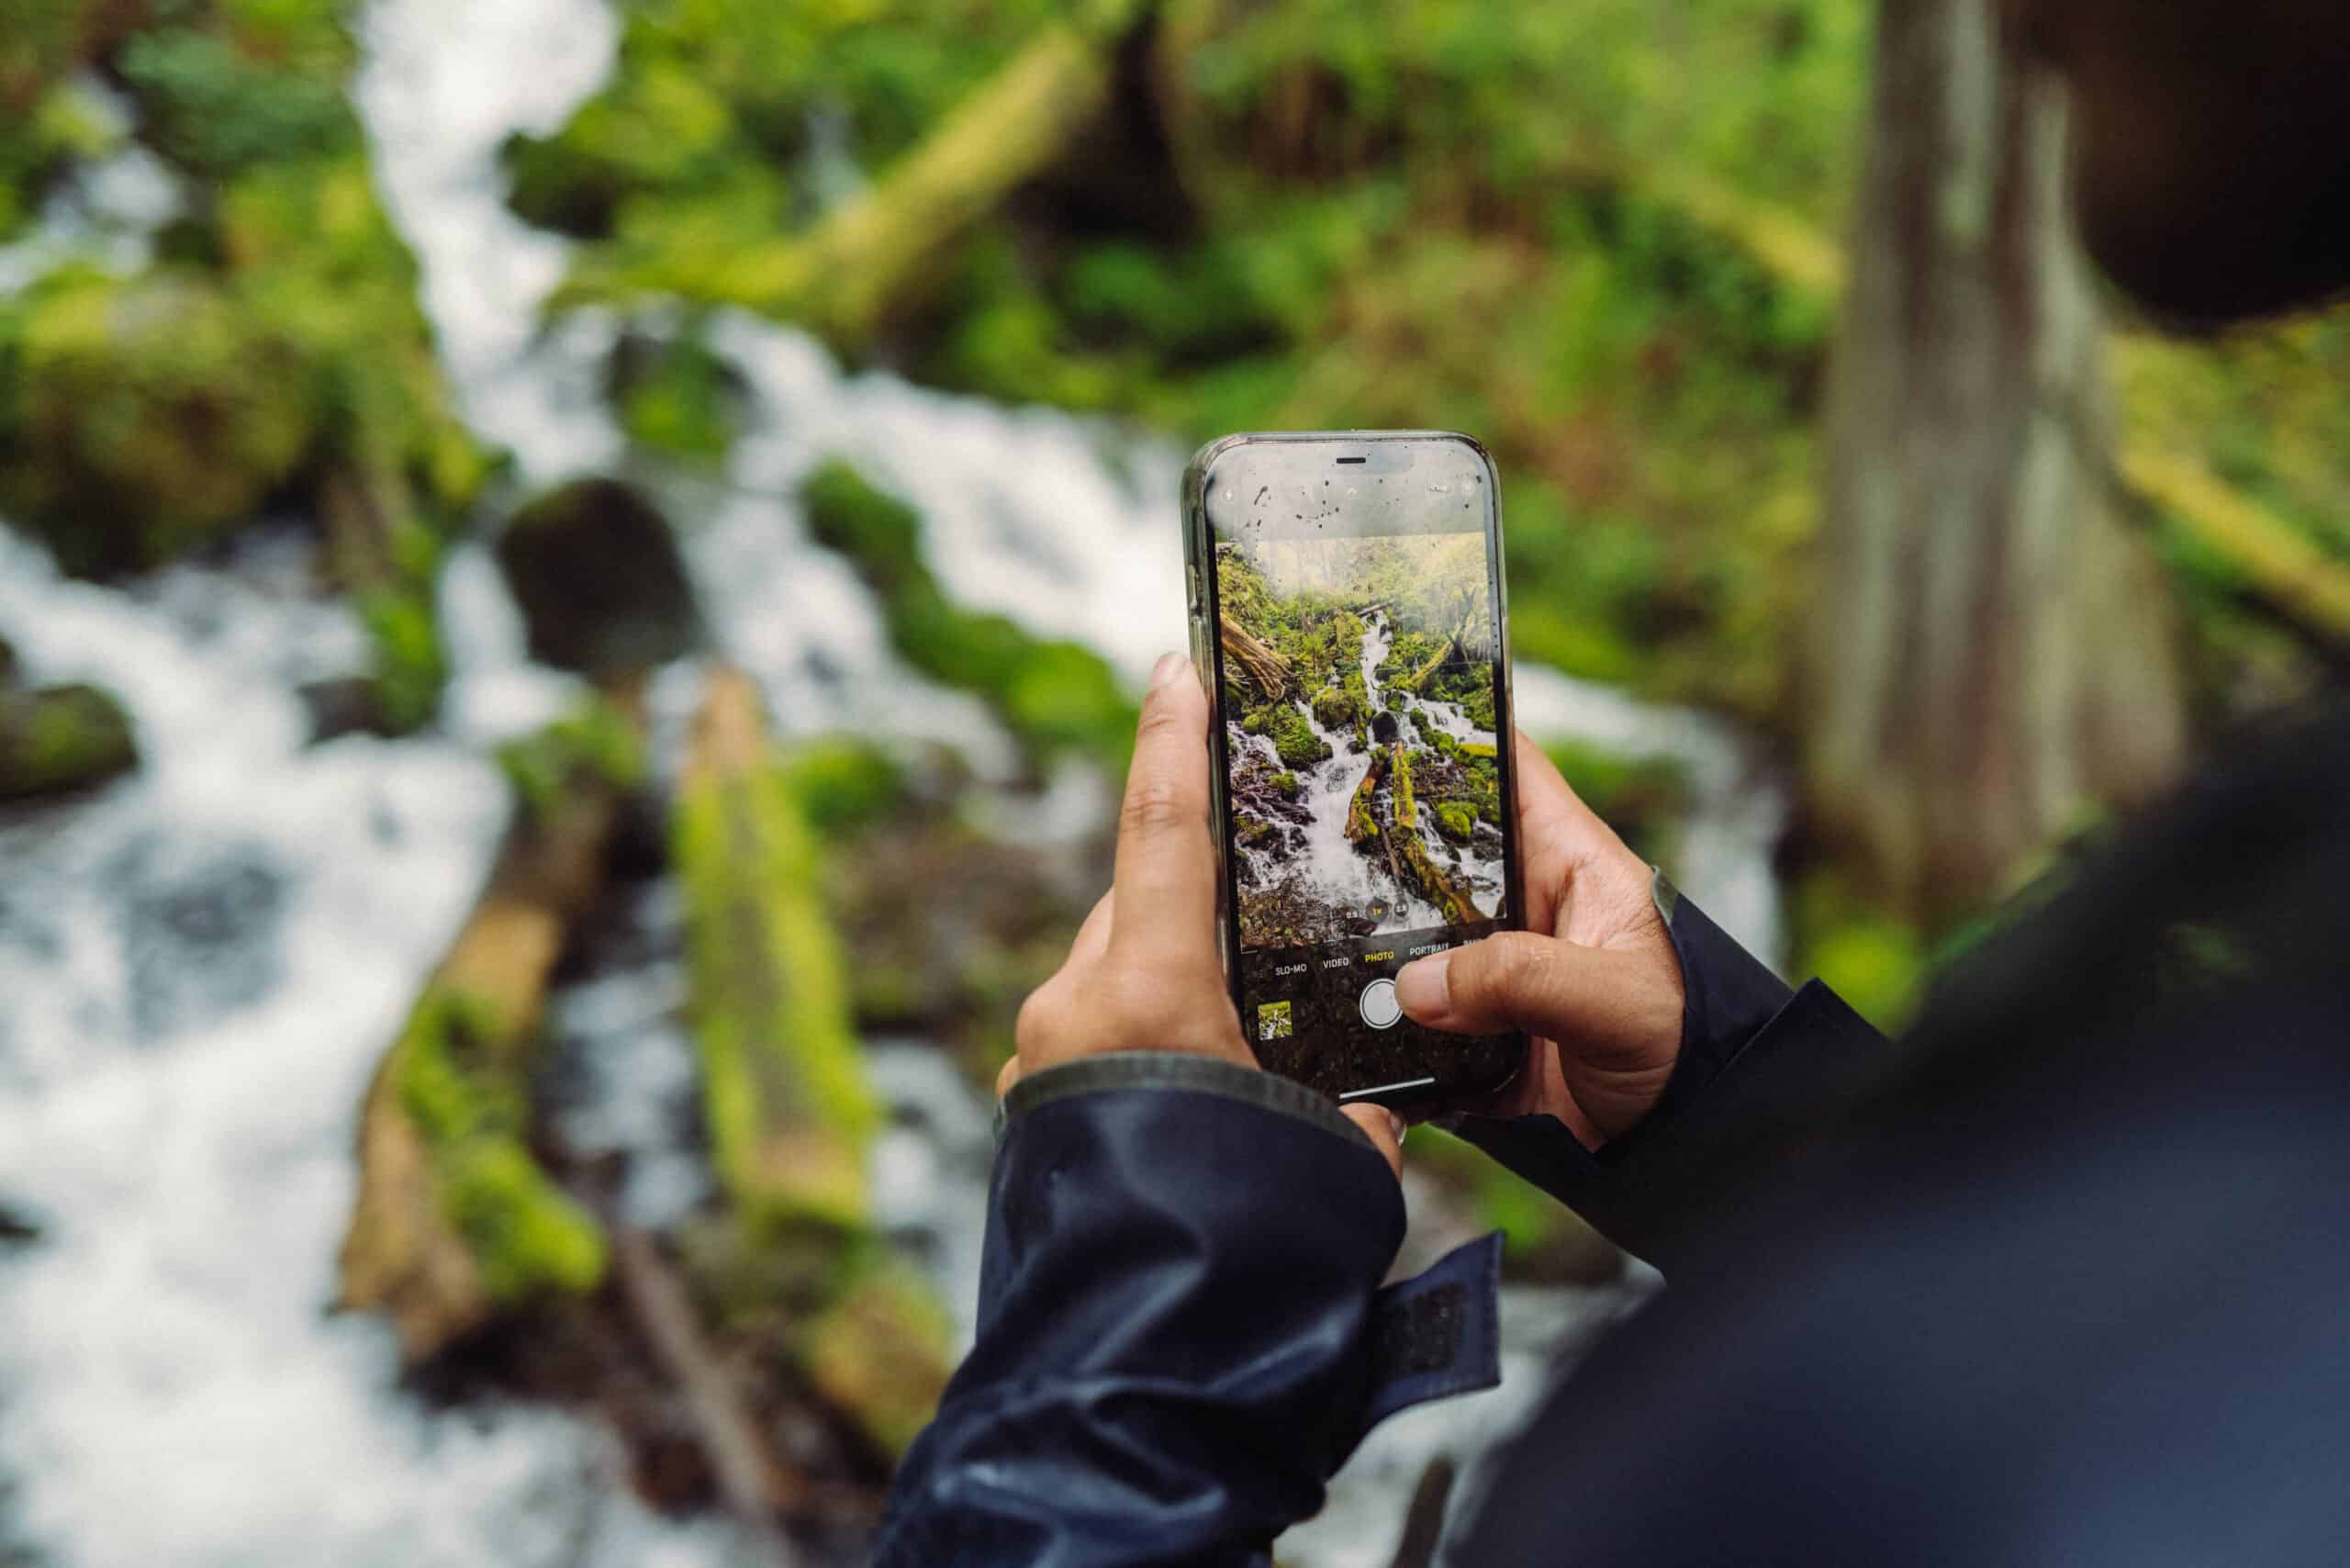 31 Brilliant Smartphone Landscape Photography Tips To Elevate Your Images